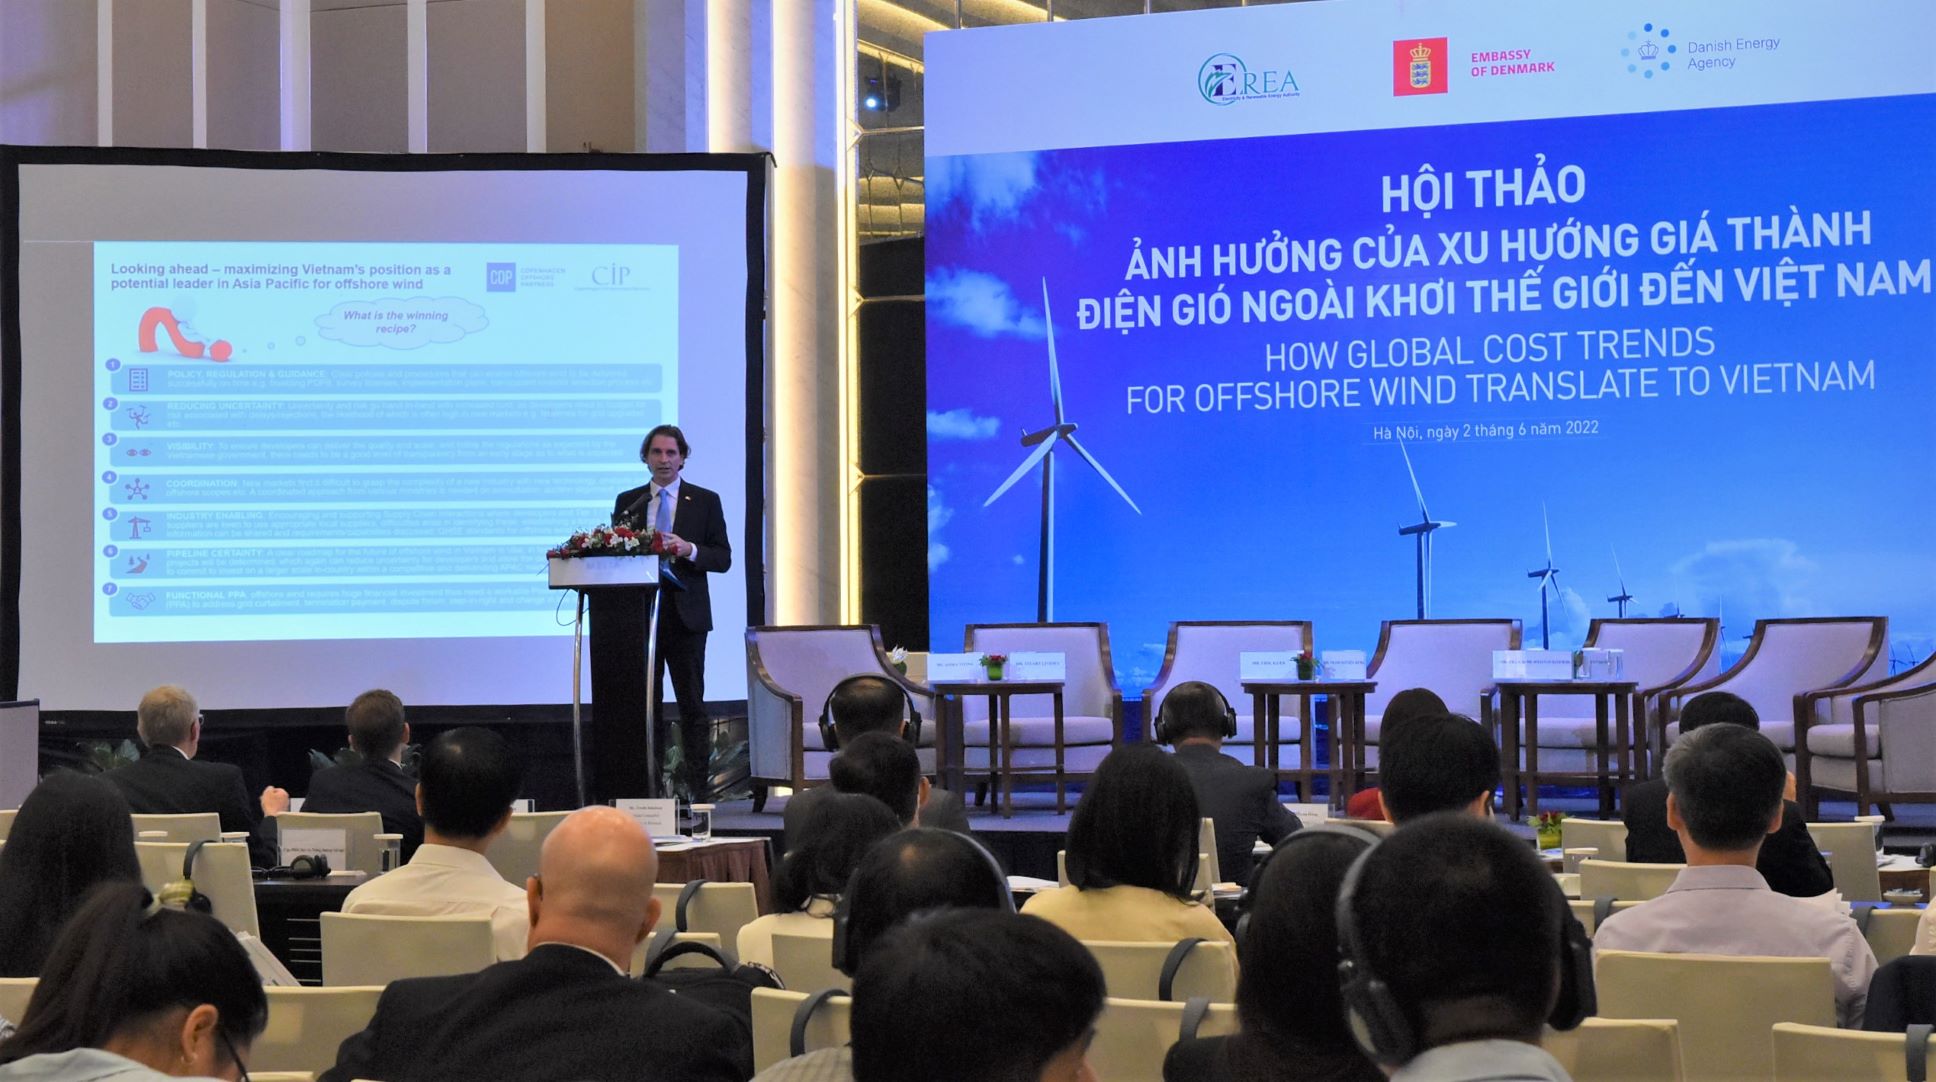 CEO of La Gan Wind presented and joined the panel discussion at the workshop “How global cost trends for offshore wind translate to Vietnam”